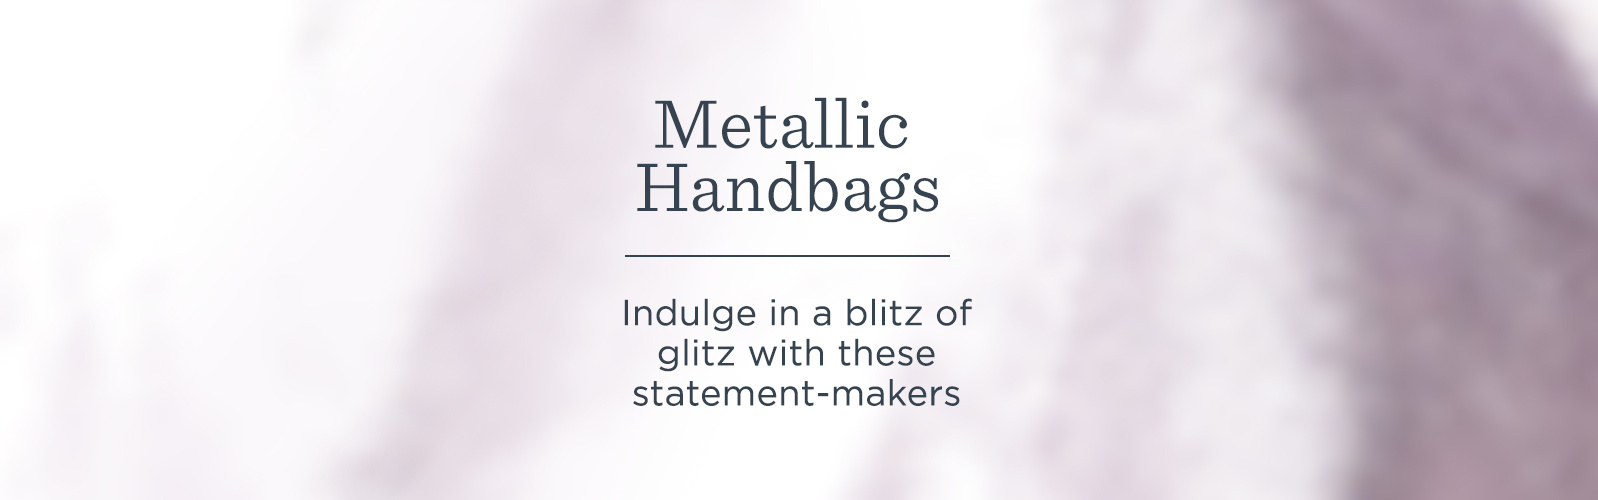 Metallic Handbags  Indulge in a blitz of glitz with these statement-makers